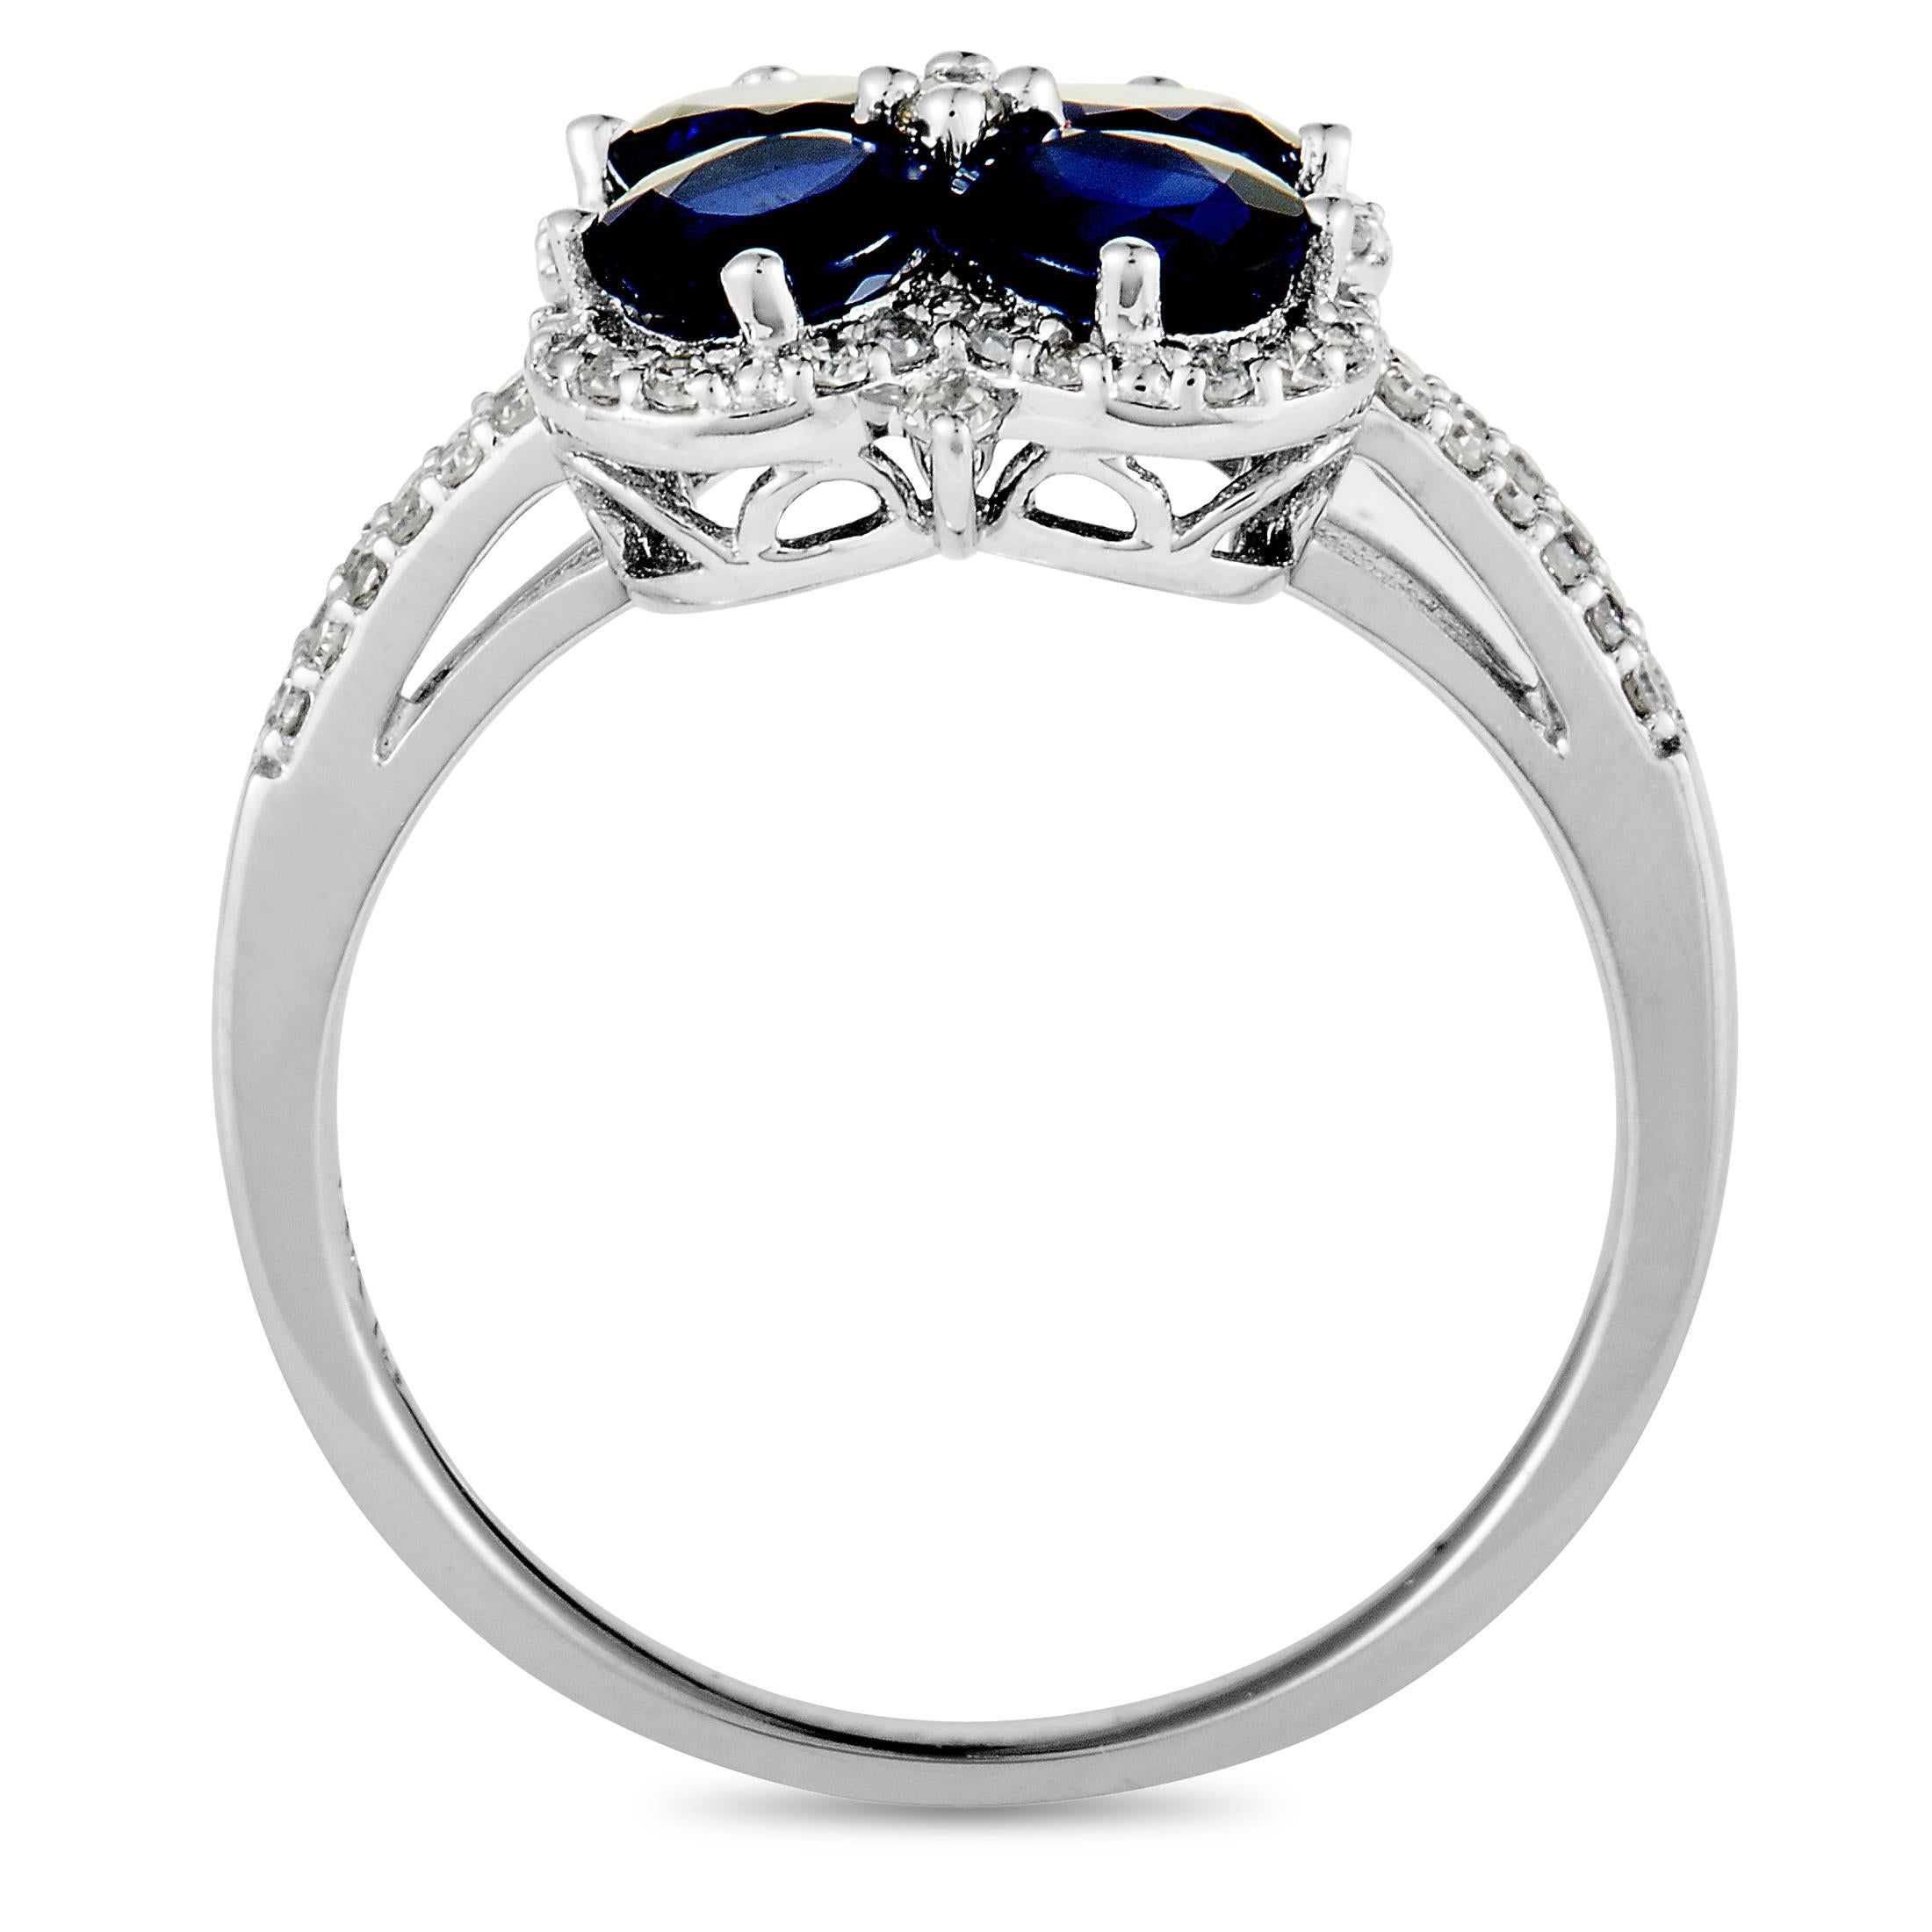 This ring is made of 14K white gold and weighs 3.8 grams. It is set with sapphires and with a total of 0.25 carats of diamonds. The ring boasts band thickness of 2 mm and top height of 6 mm, while top dimensions measure 19 by 11 mm.
 
 Offered in